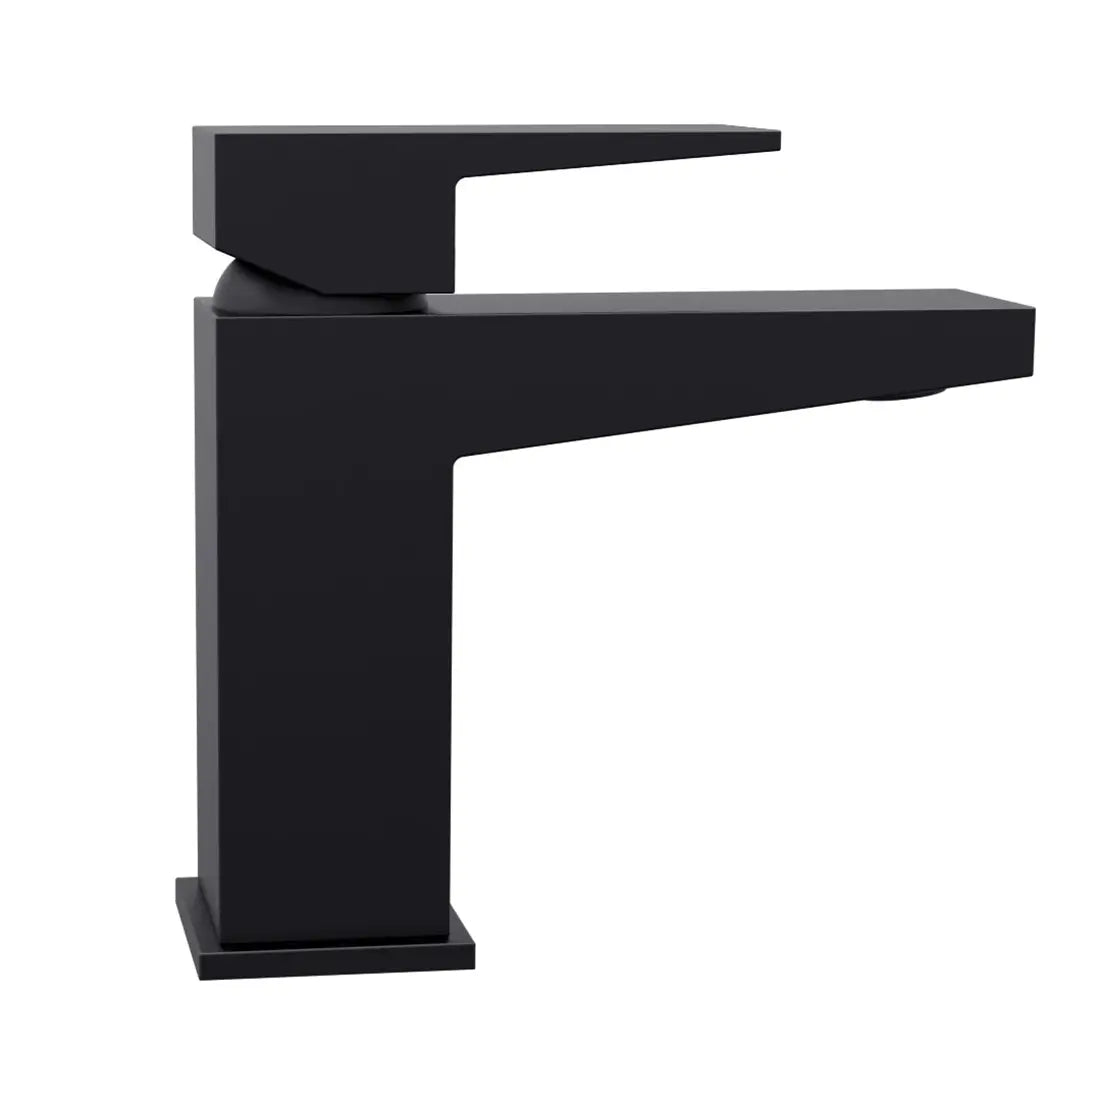 Lulani Boracay Matte Black 1.2 GPM Single Hole Brass Faucet With Drain Assembly